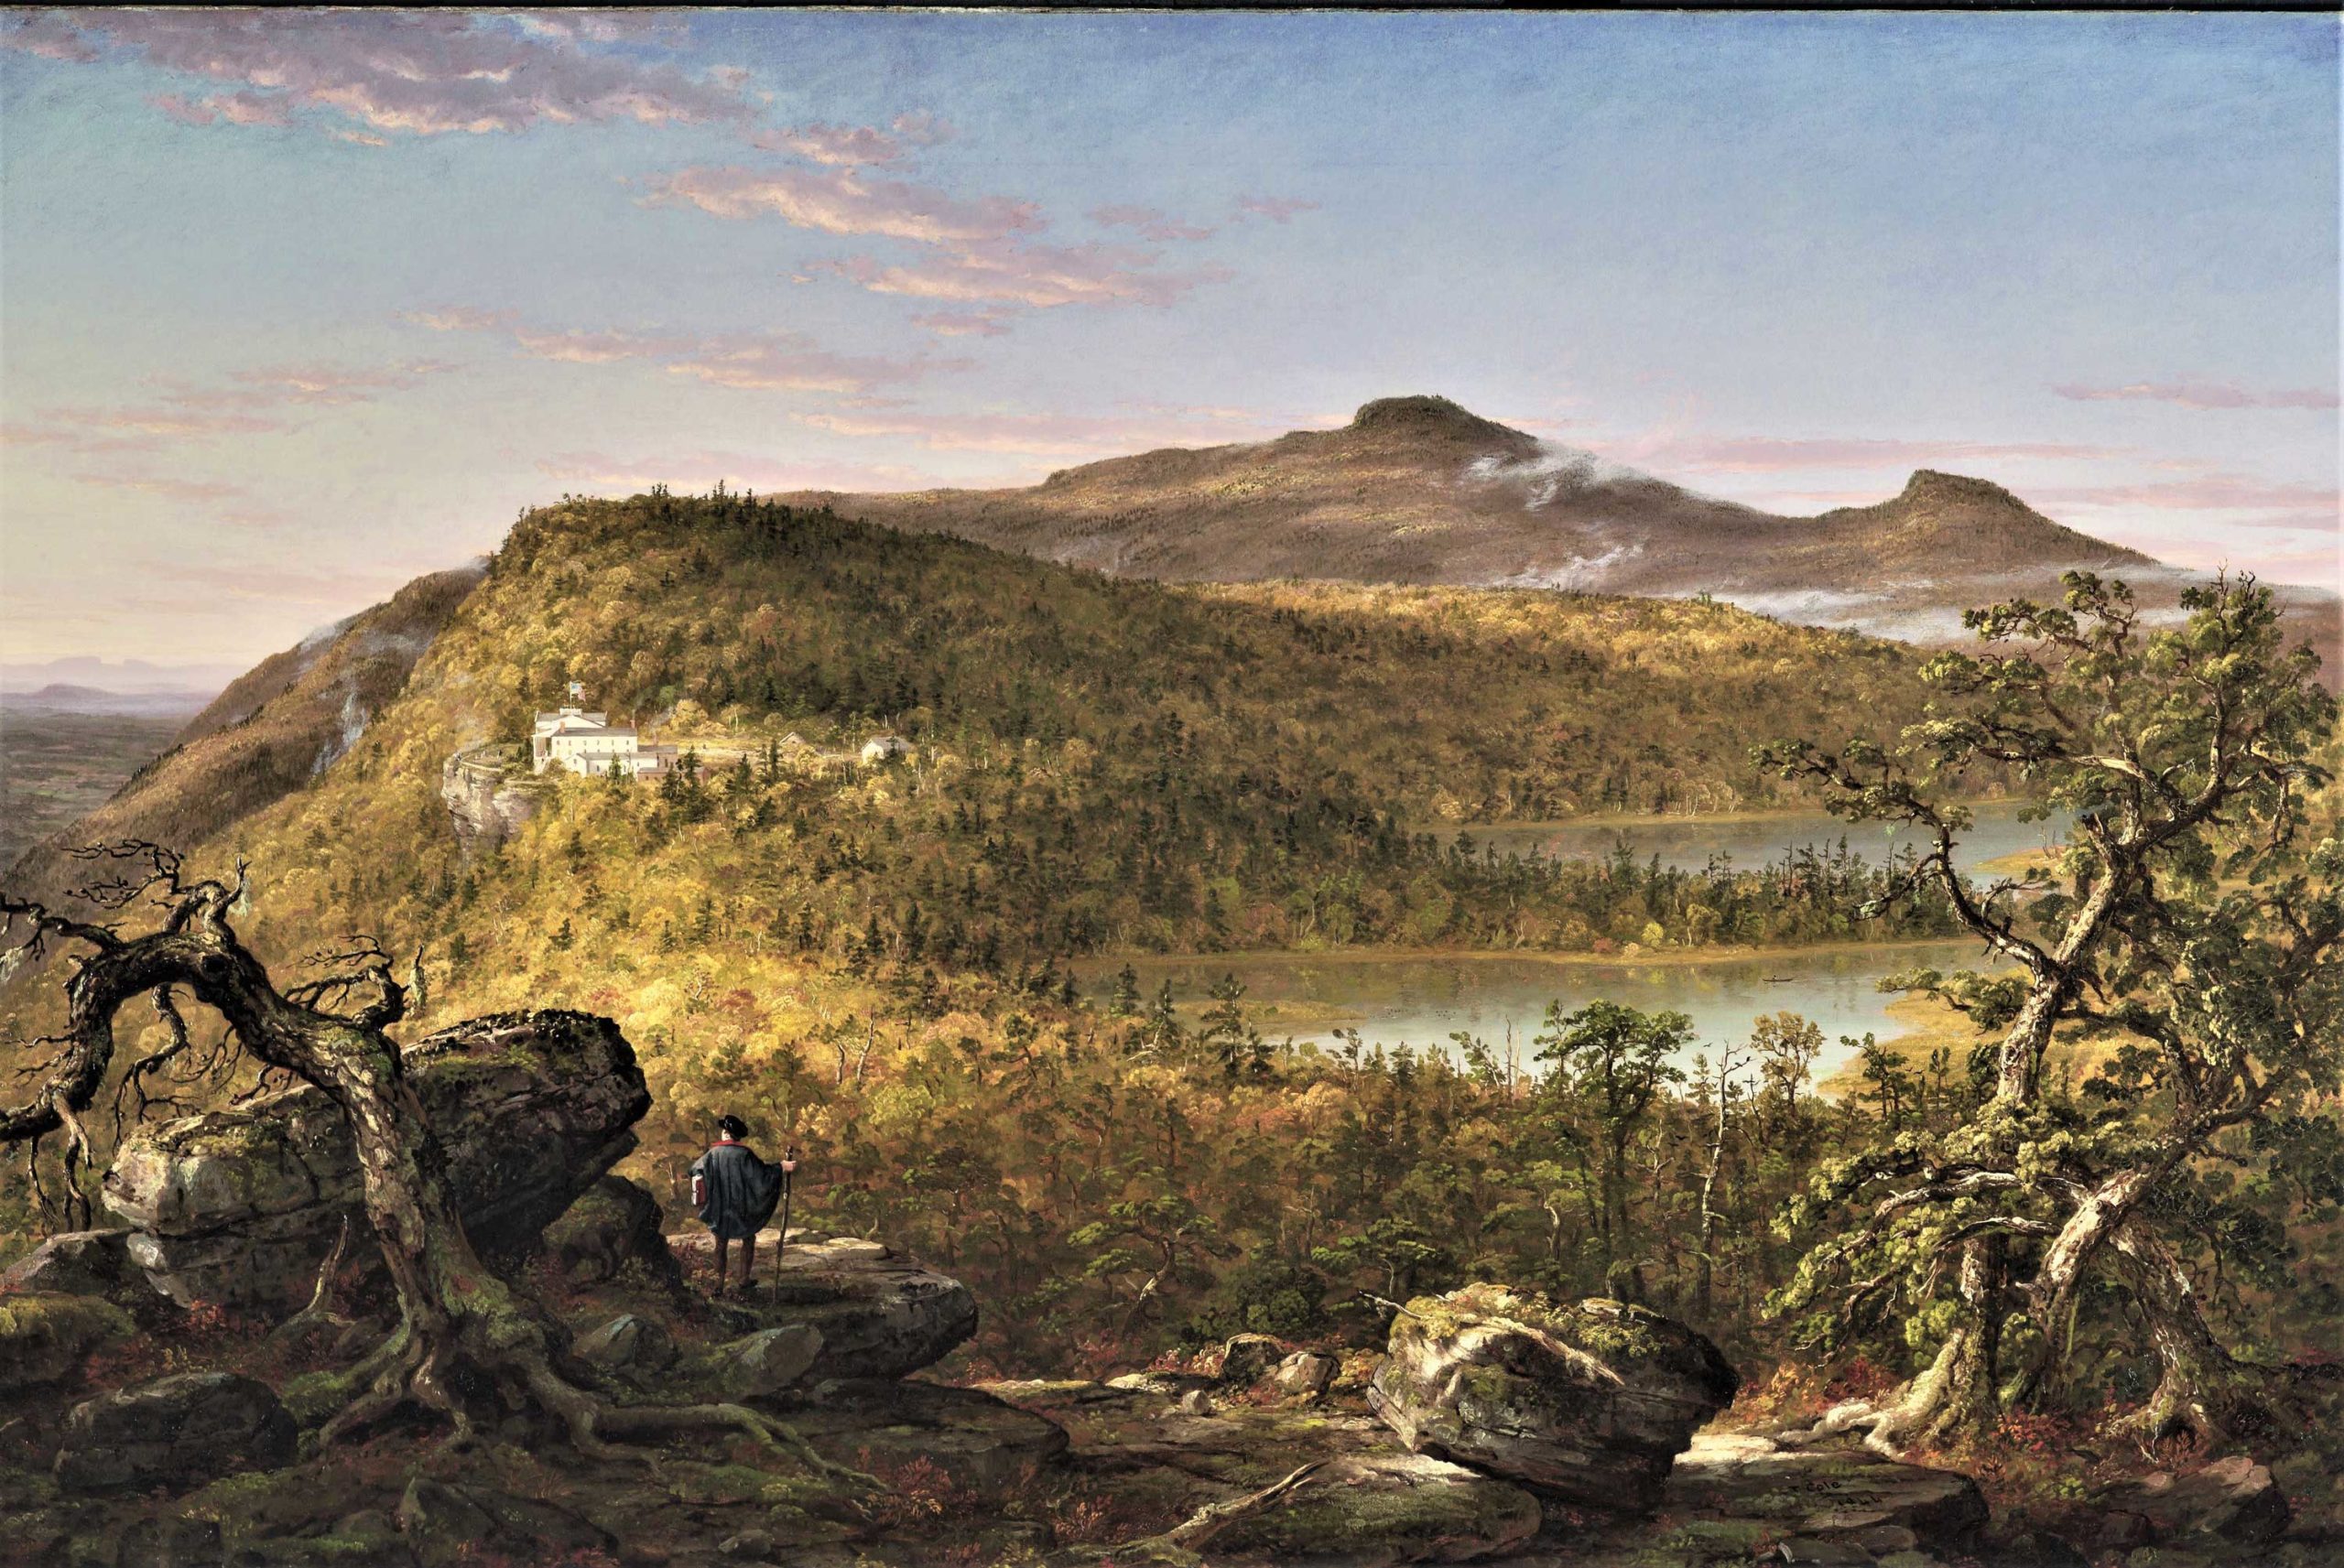 Fig. 4: THOMAS COLE (1801–1848), "A View of the Two Lakes and Mountain House," Catskill Mountains, Morning, 1844, oil on canvas, 35 13/16 x 53 7/8 in., Brooklyn Museum, New York